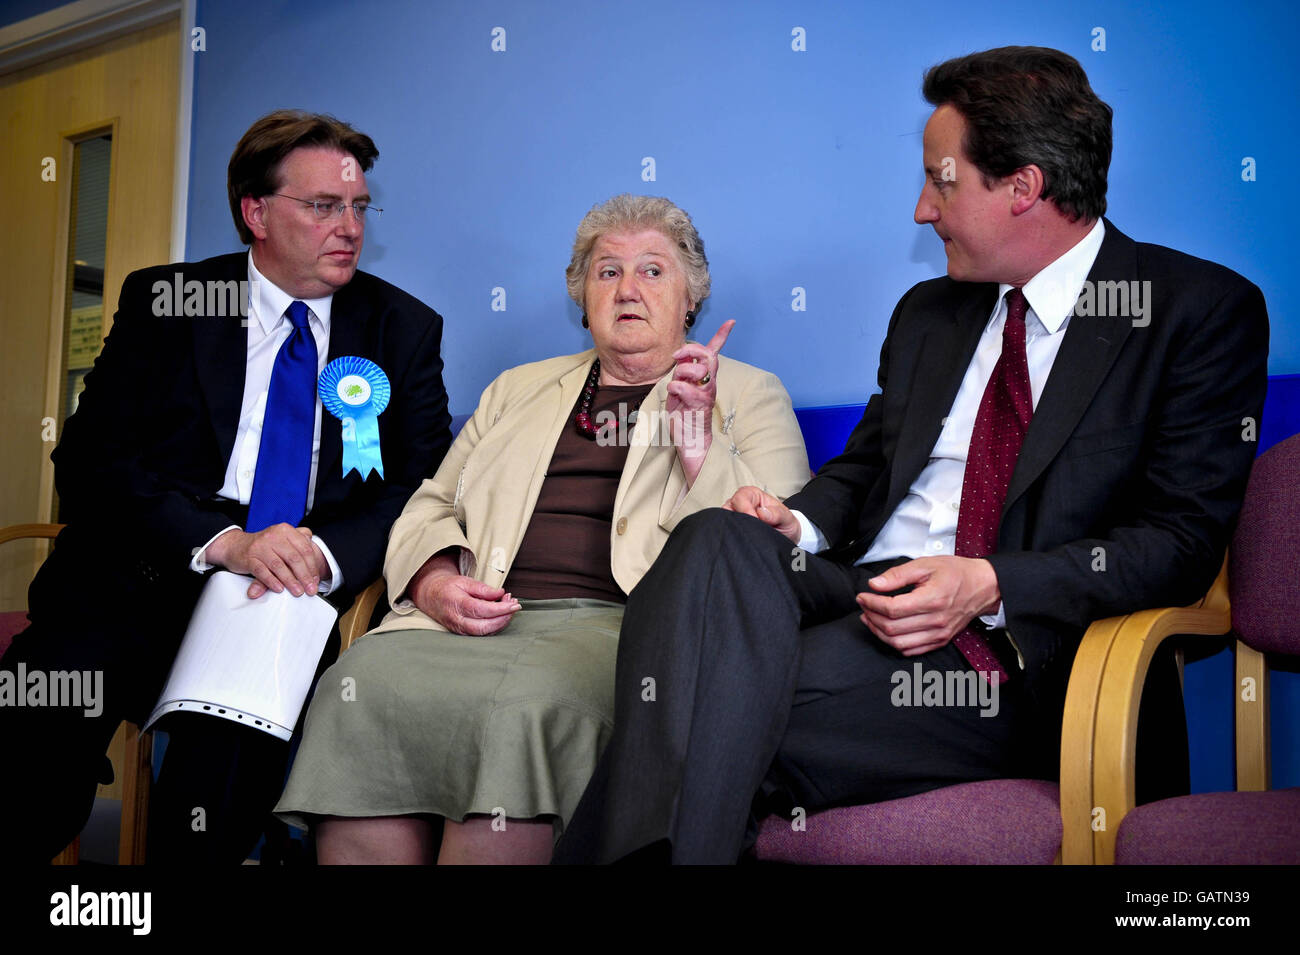 (left to right) John Howell, the Conservative party candidate for the Henley-on-Thames by-election, meets patient Edna Smith, 69, with Conservative leader David Cameron during a visit to the Nettlebed surgery in the constituency. Stock Photo